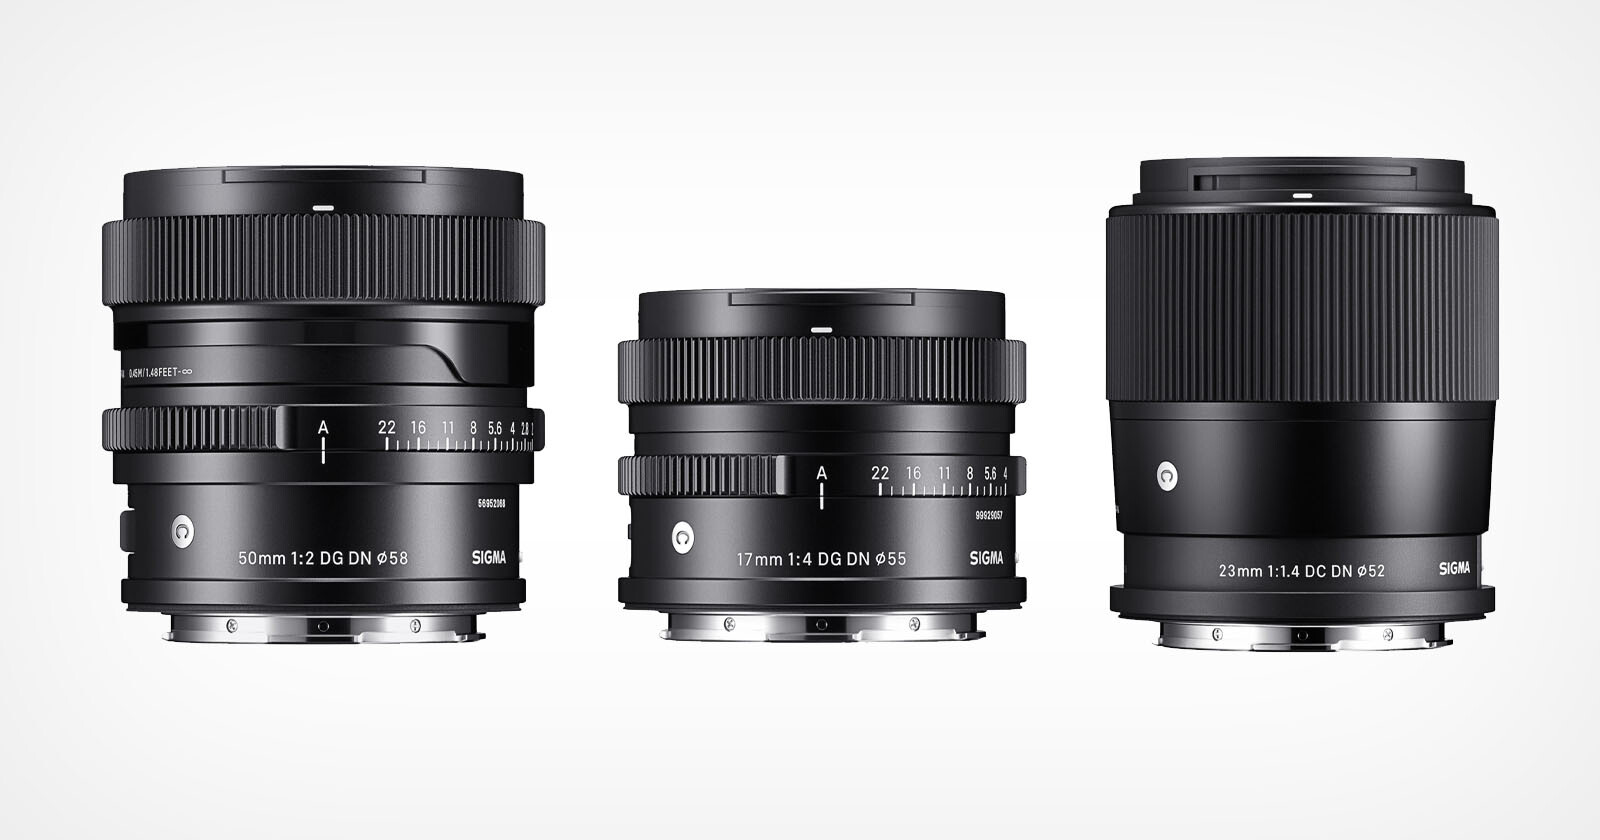 Sigma Adds Three New Lenses: 17mm f/4, 50mm f/2, and 23mm f/1.4